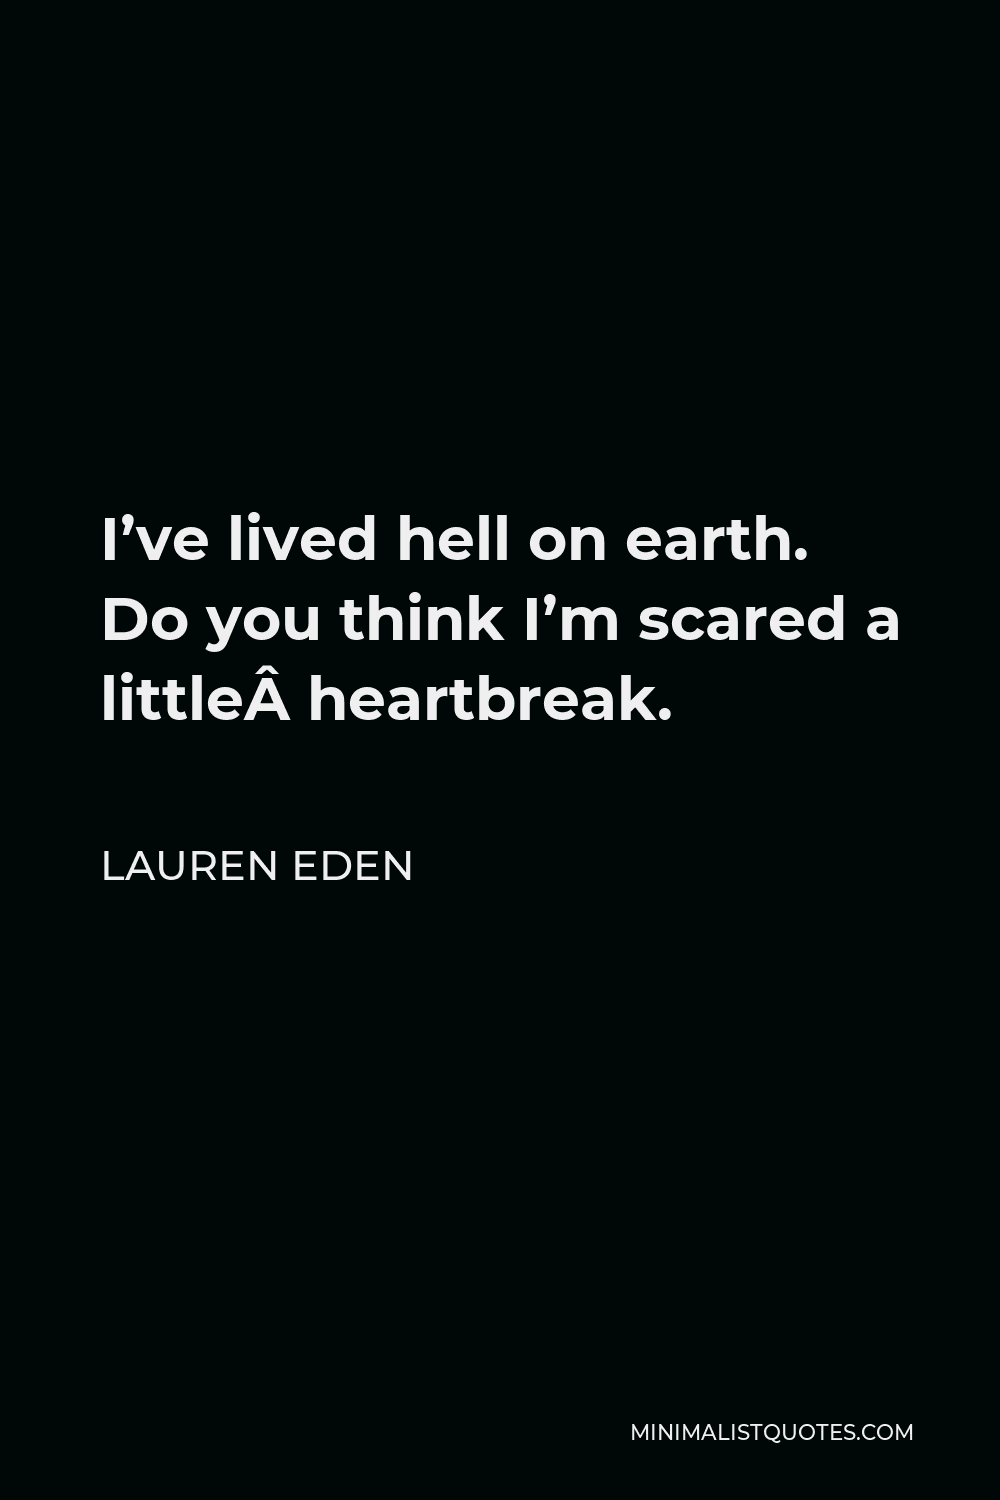 Lauren Eden Quote - I’ve lived hell on earth. Do you think I’m scared a little heartbreak.